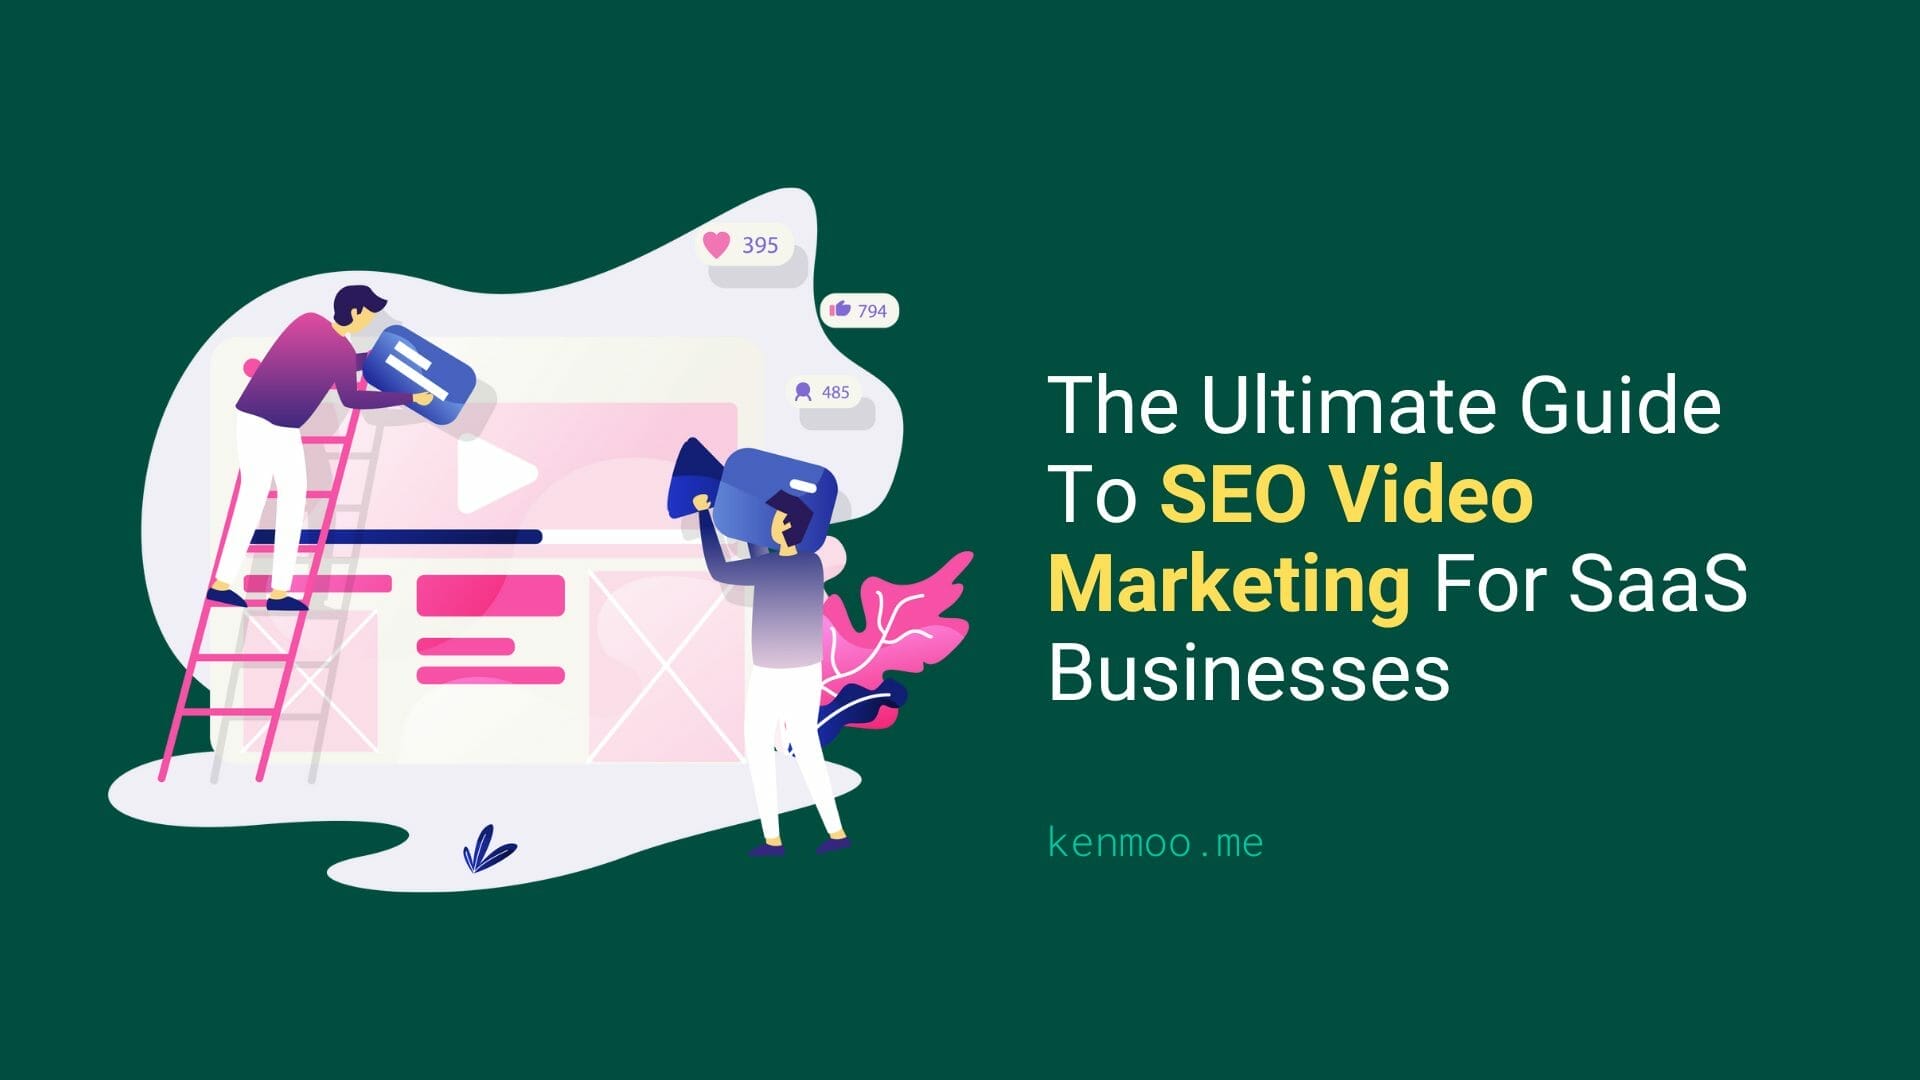 The Ultimate Guide To SEO Video Marketing For SaaS Businesses